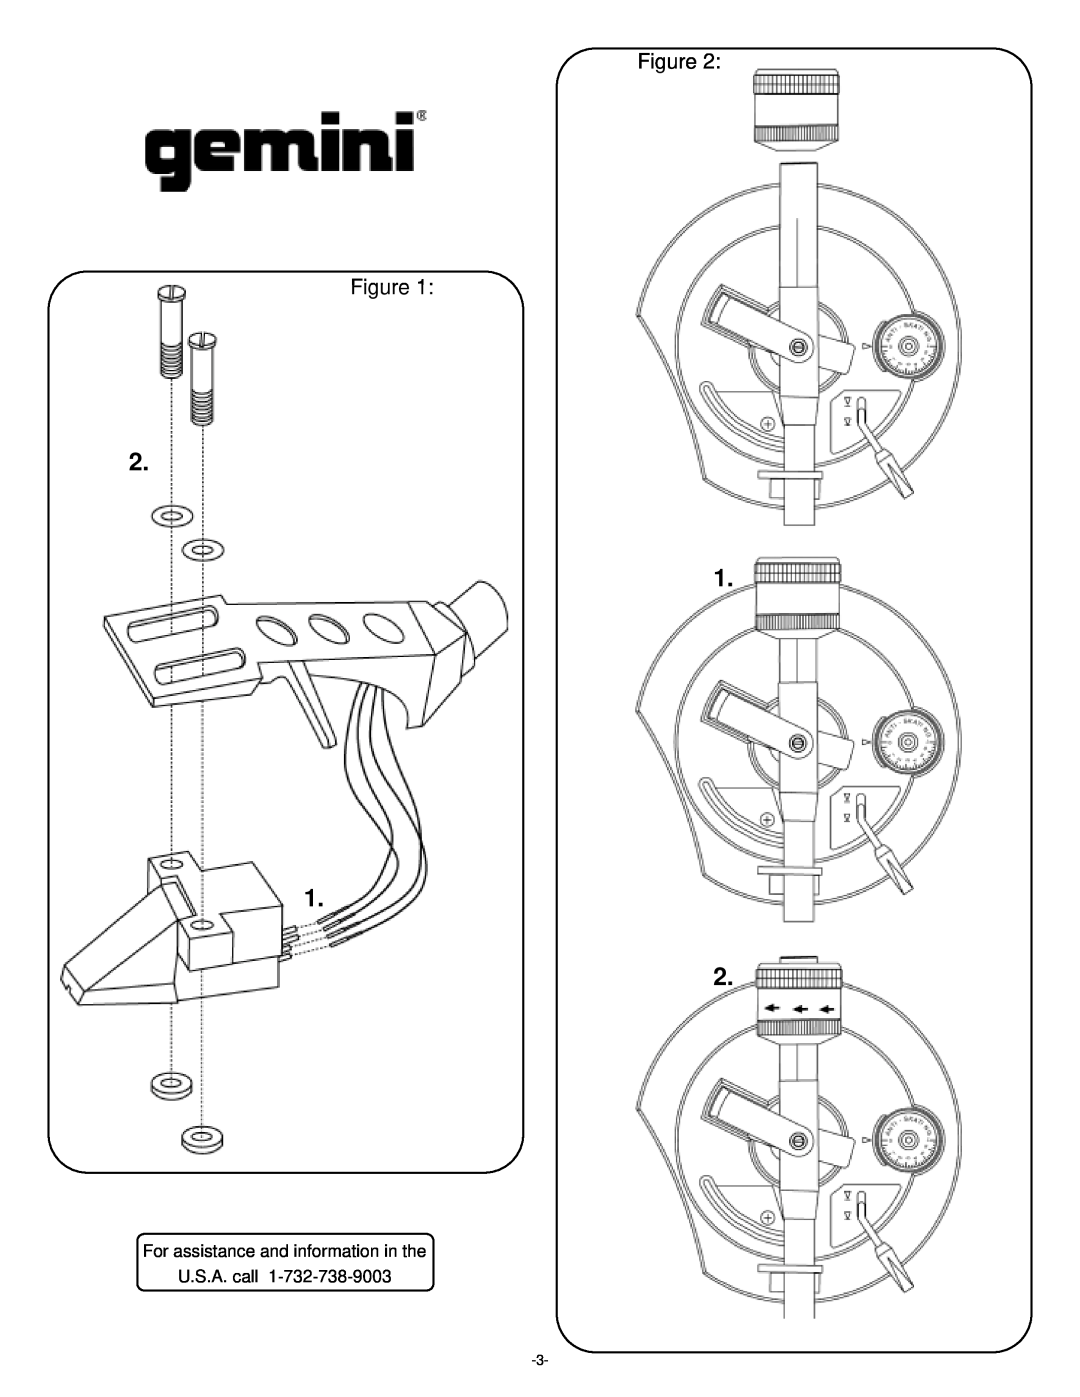 Gemini PDT-6000 manual Figure Figure, For assistance and information in the U.S.A. call 